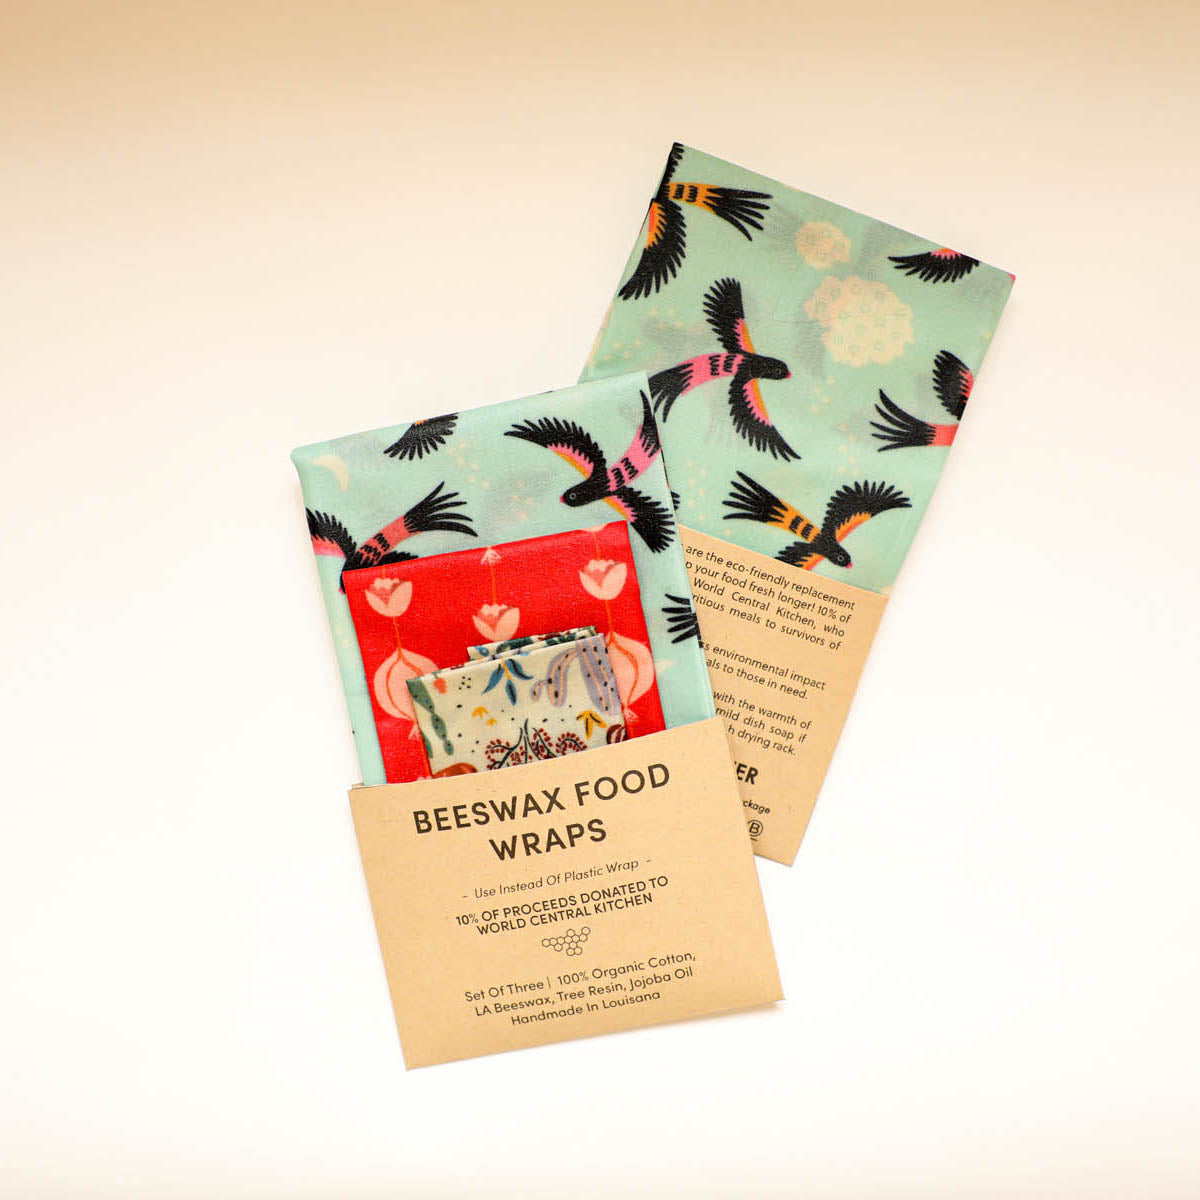 Beeswax Food Wraps - Songbirds & Cacti, Oh My Set, Organic Cotton, gives to World Central Kitchen